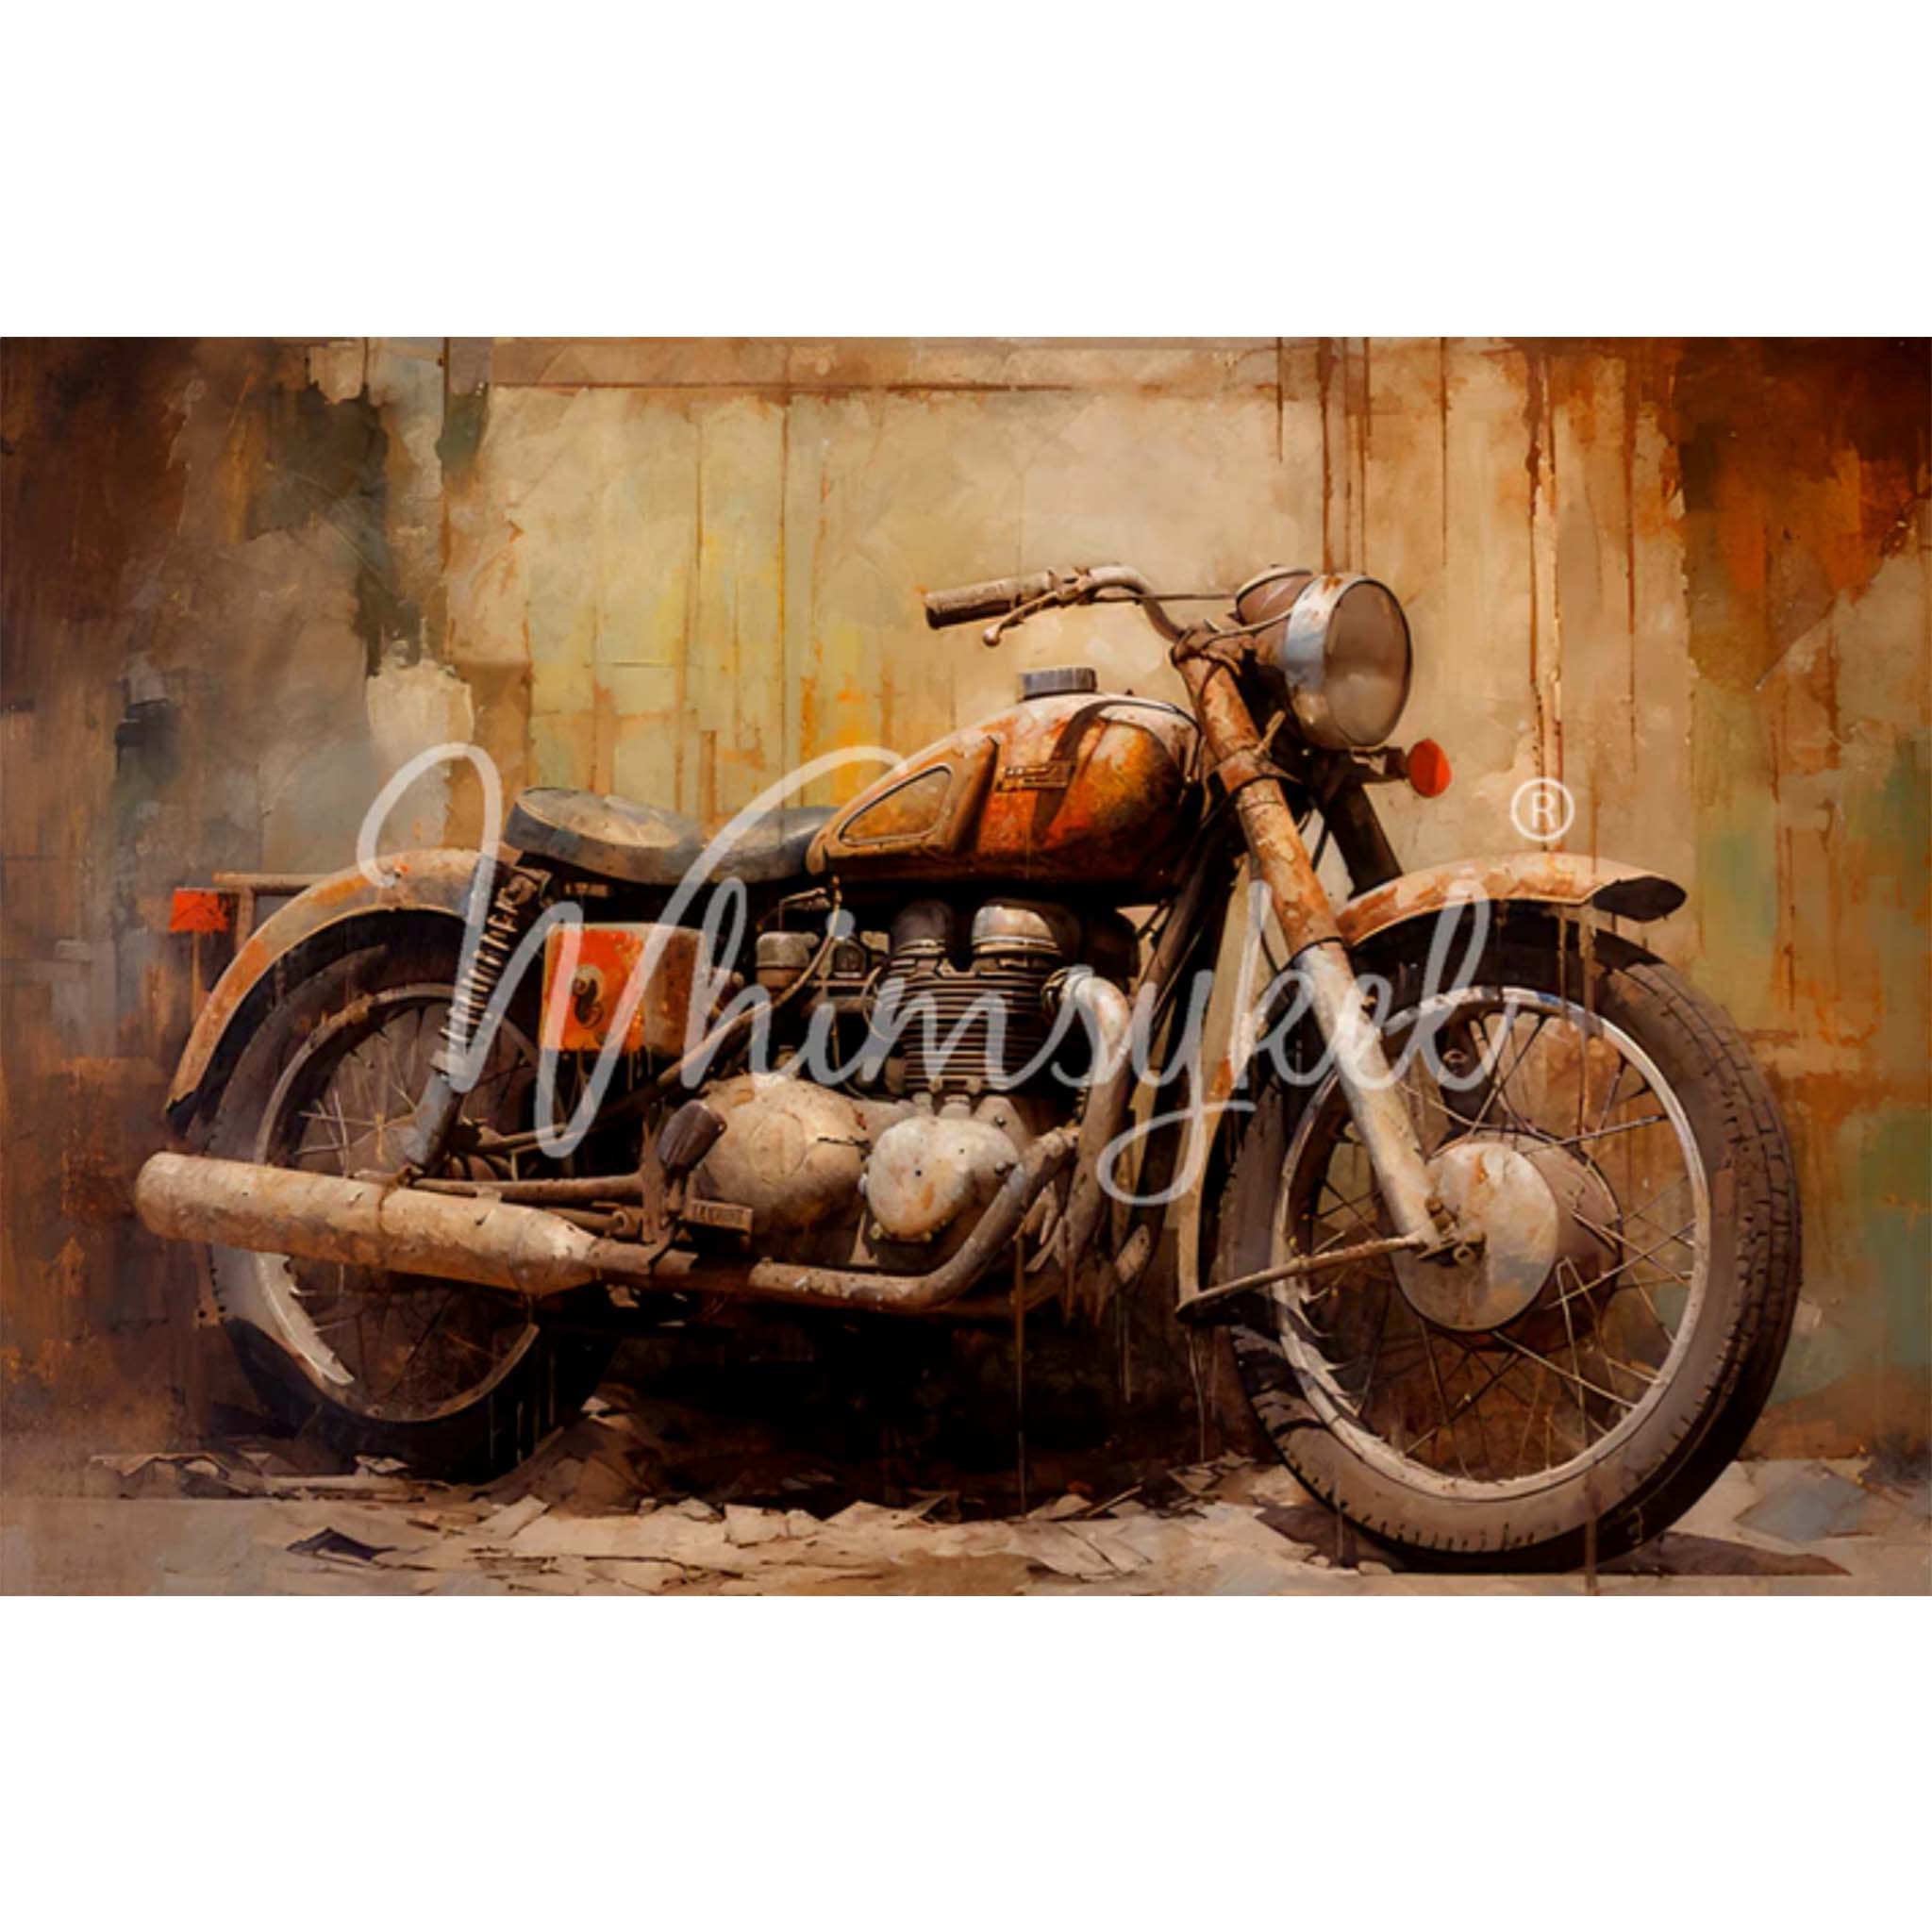 Tissue paper design that features a vintage motorcycle with fading paint against a concrete wall. White borders are on the top and bottom.